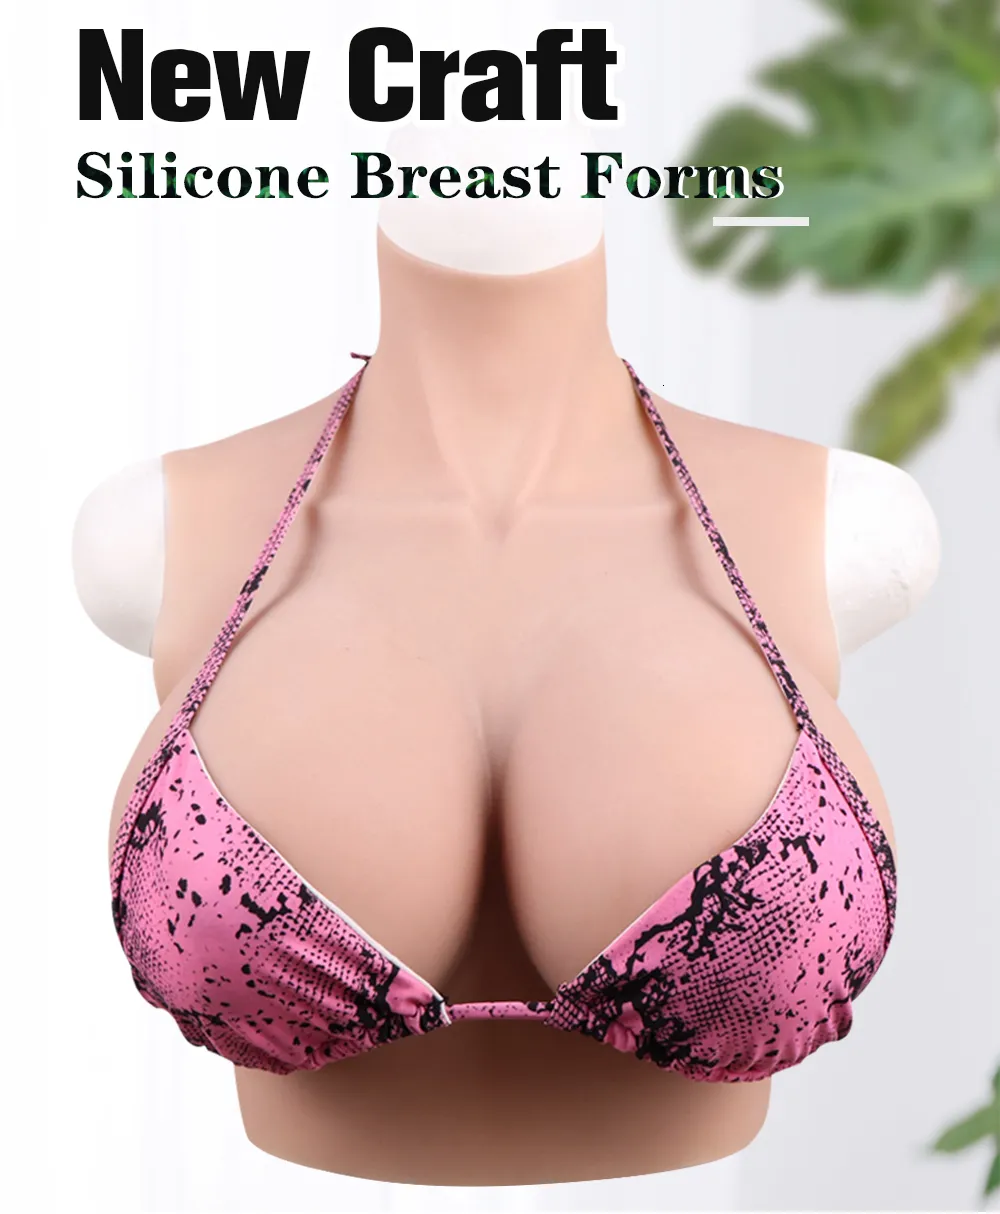 Crossdresser Breast Cotton Filled F Cup Realistic Breast Enhancer  Transvestite Breasts Realitic Breastform Breast Silicone for Transgender  Mastectomy